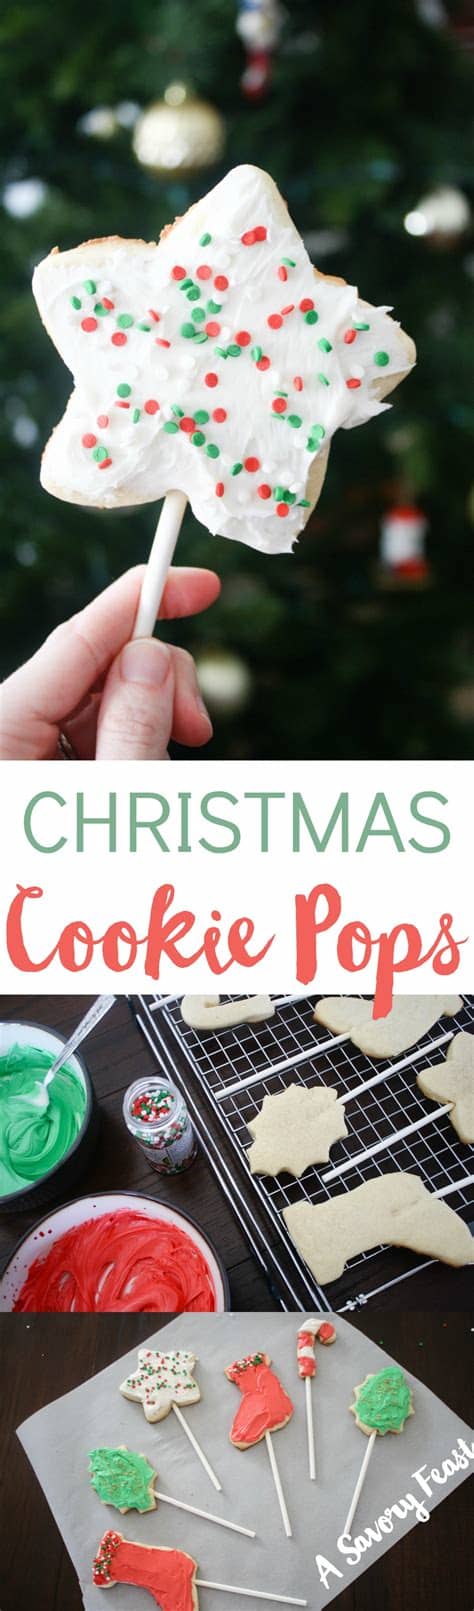 It goes marvelously with the cinnamon, allspice, and nutmeg in the batter. Christmas Cookie Pops